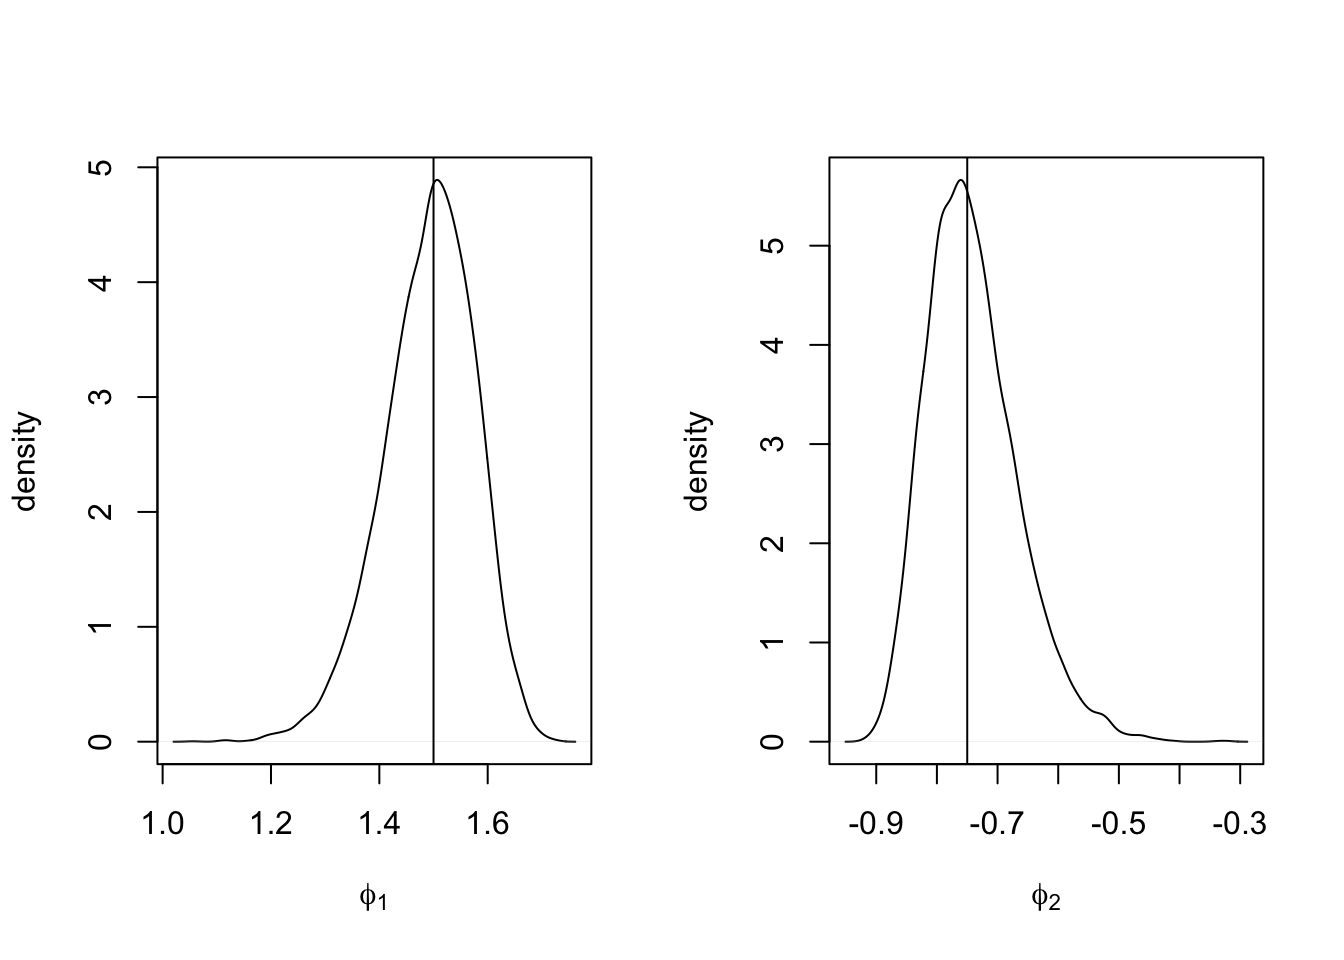 Marginal posterior densities of $\phi_1$ (left panel) and $\phi_2$ (right panel) in the AR(2) with level plus noise model. The vertical lines represent the true values assumed in the simulation.